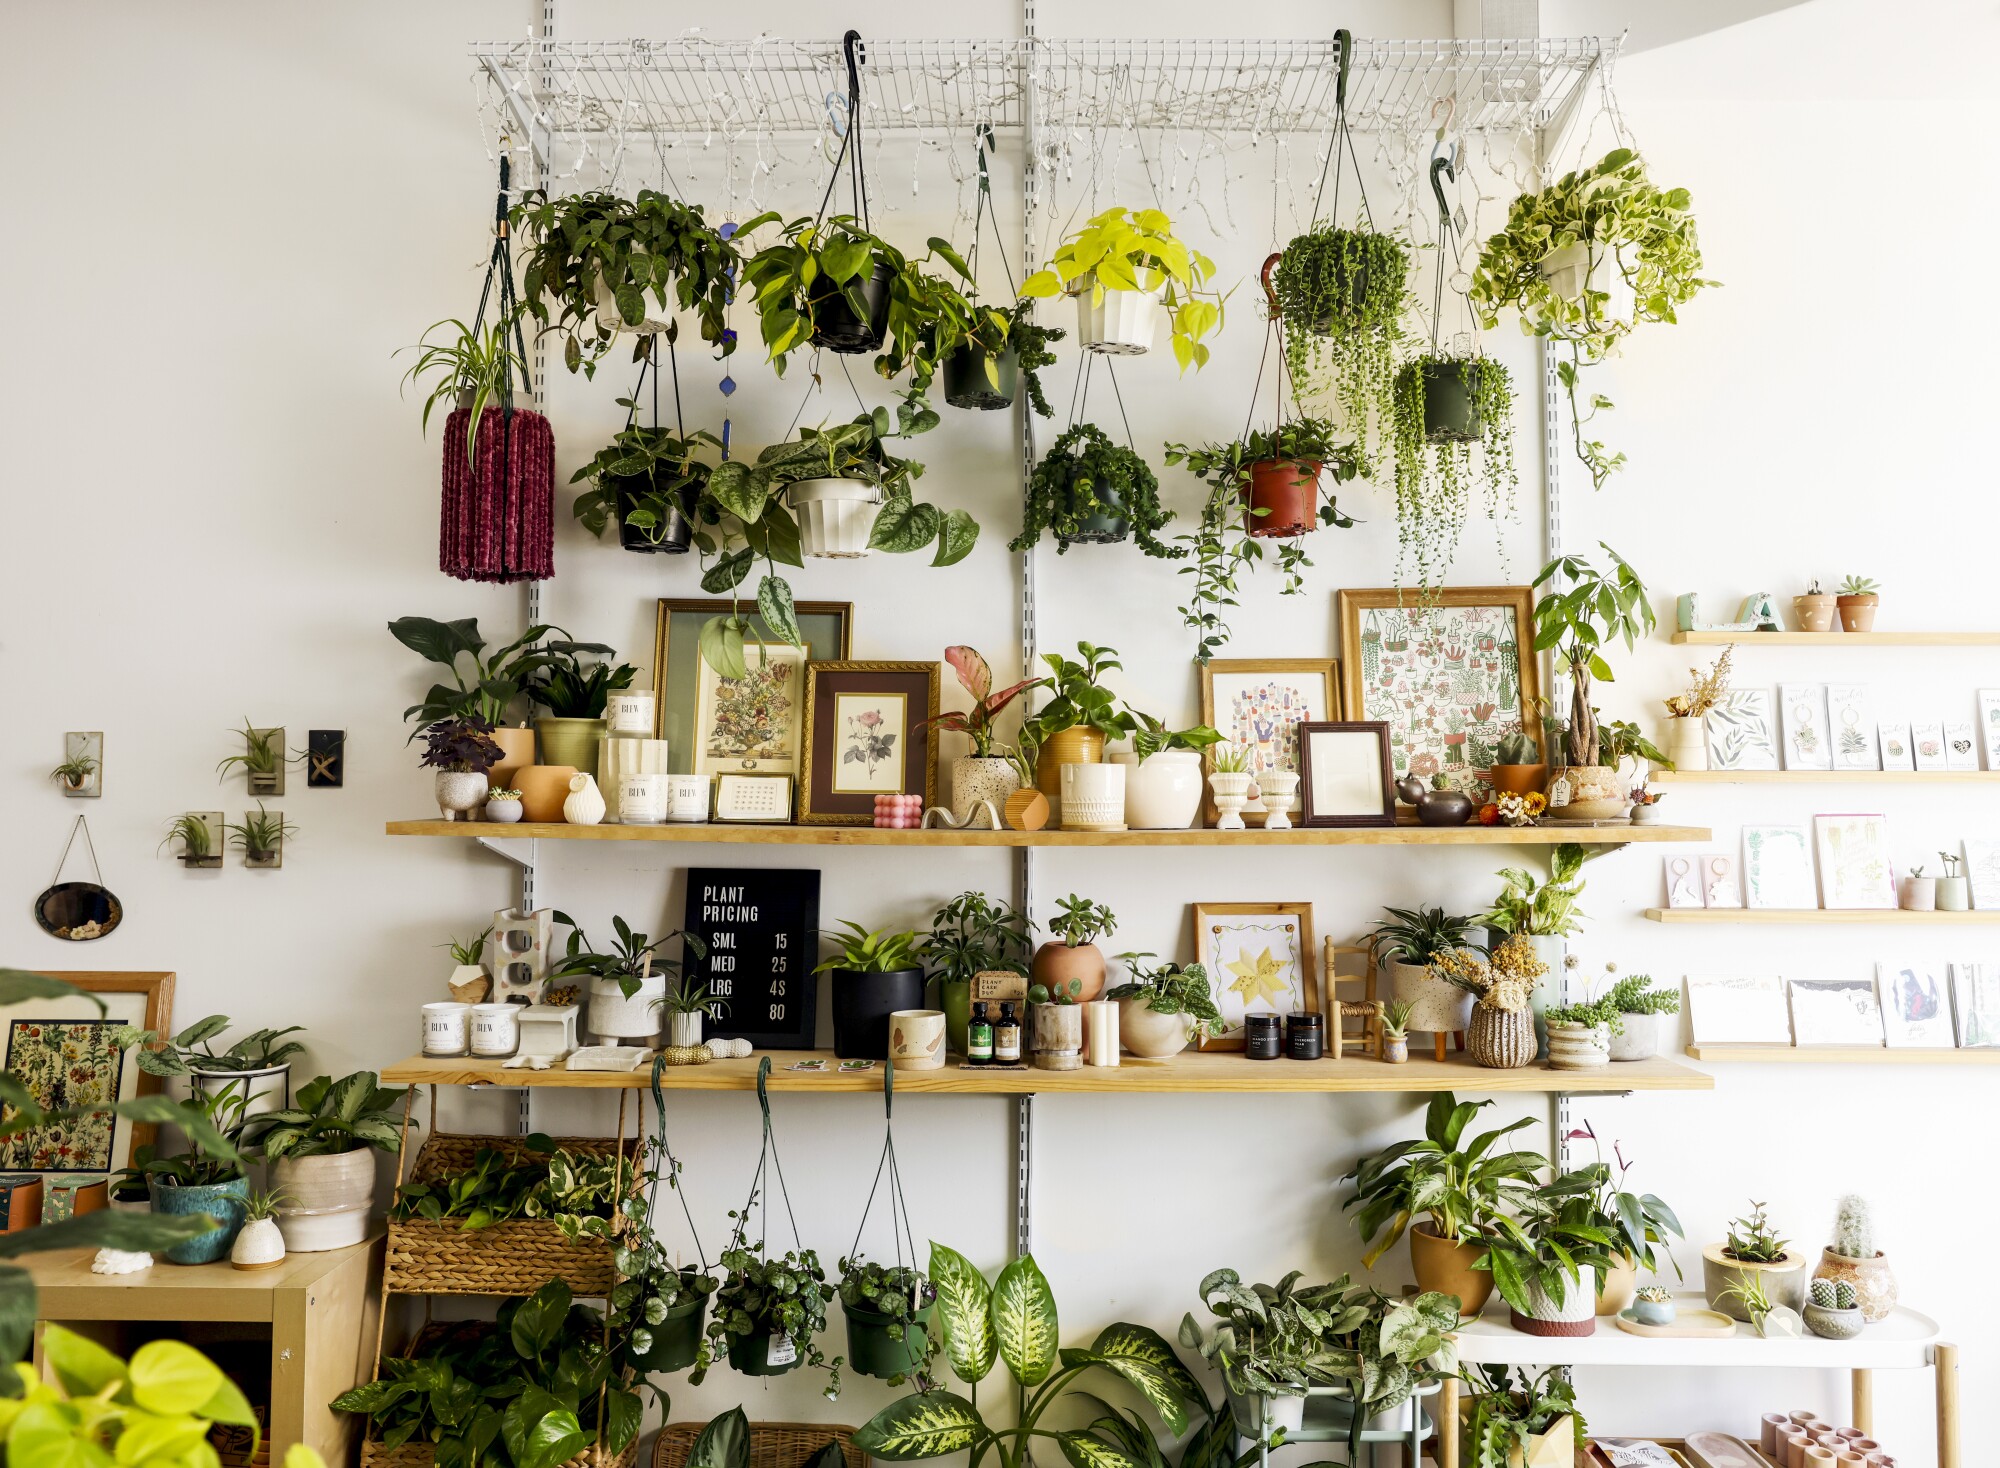 Plants, ceramics and gifts on the shelves 